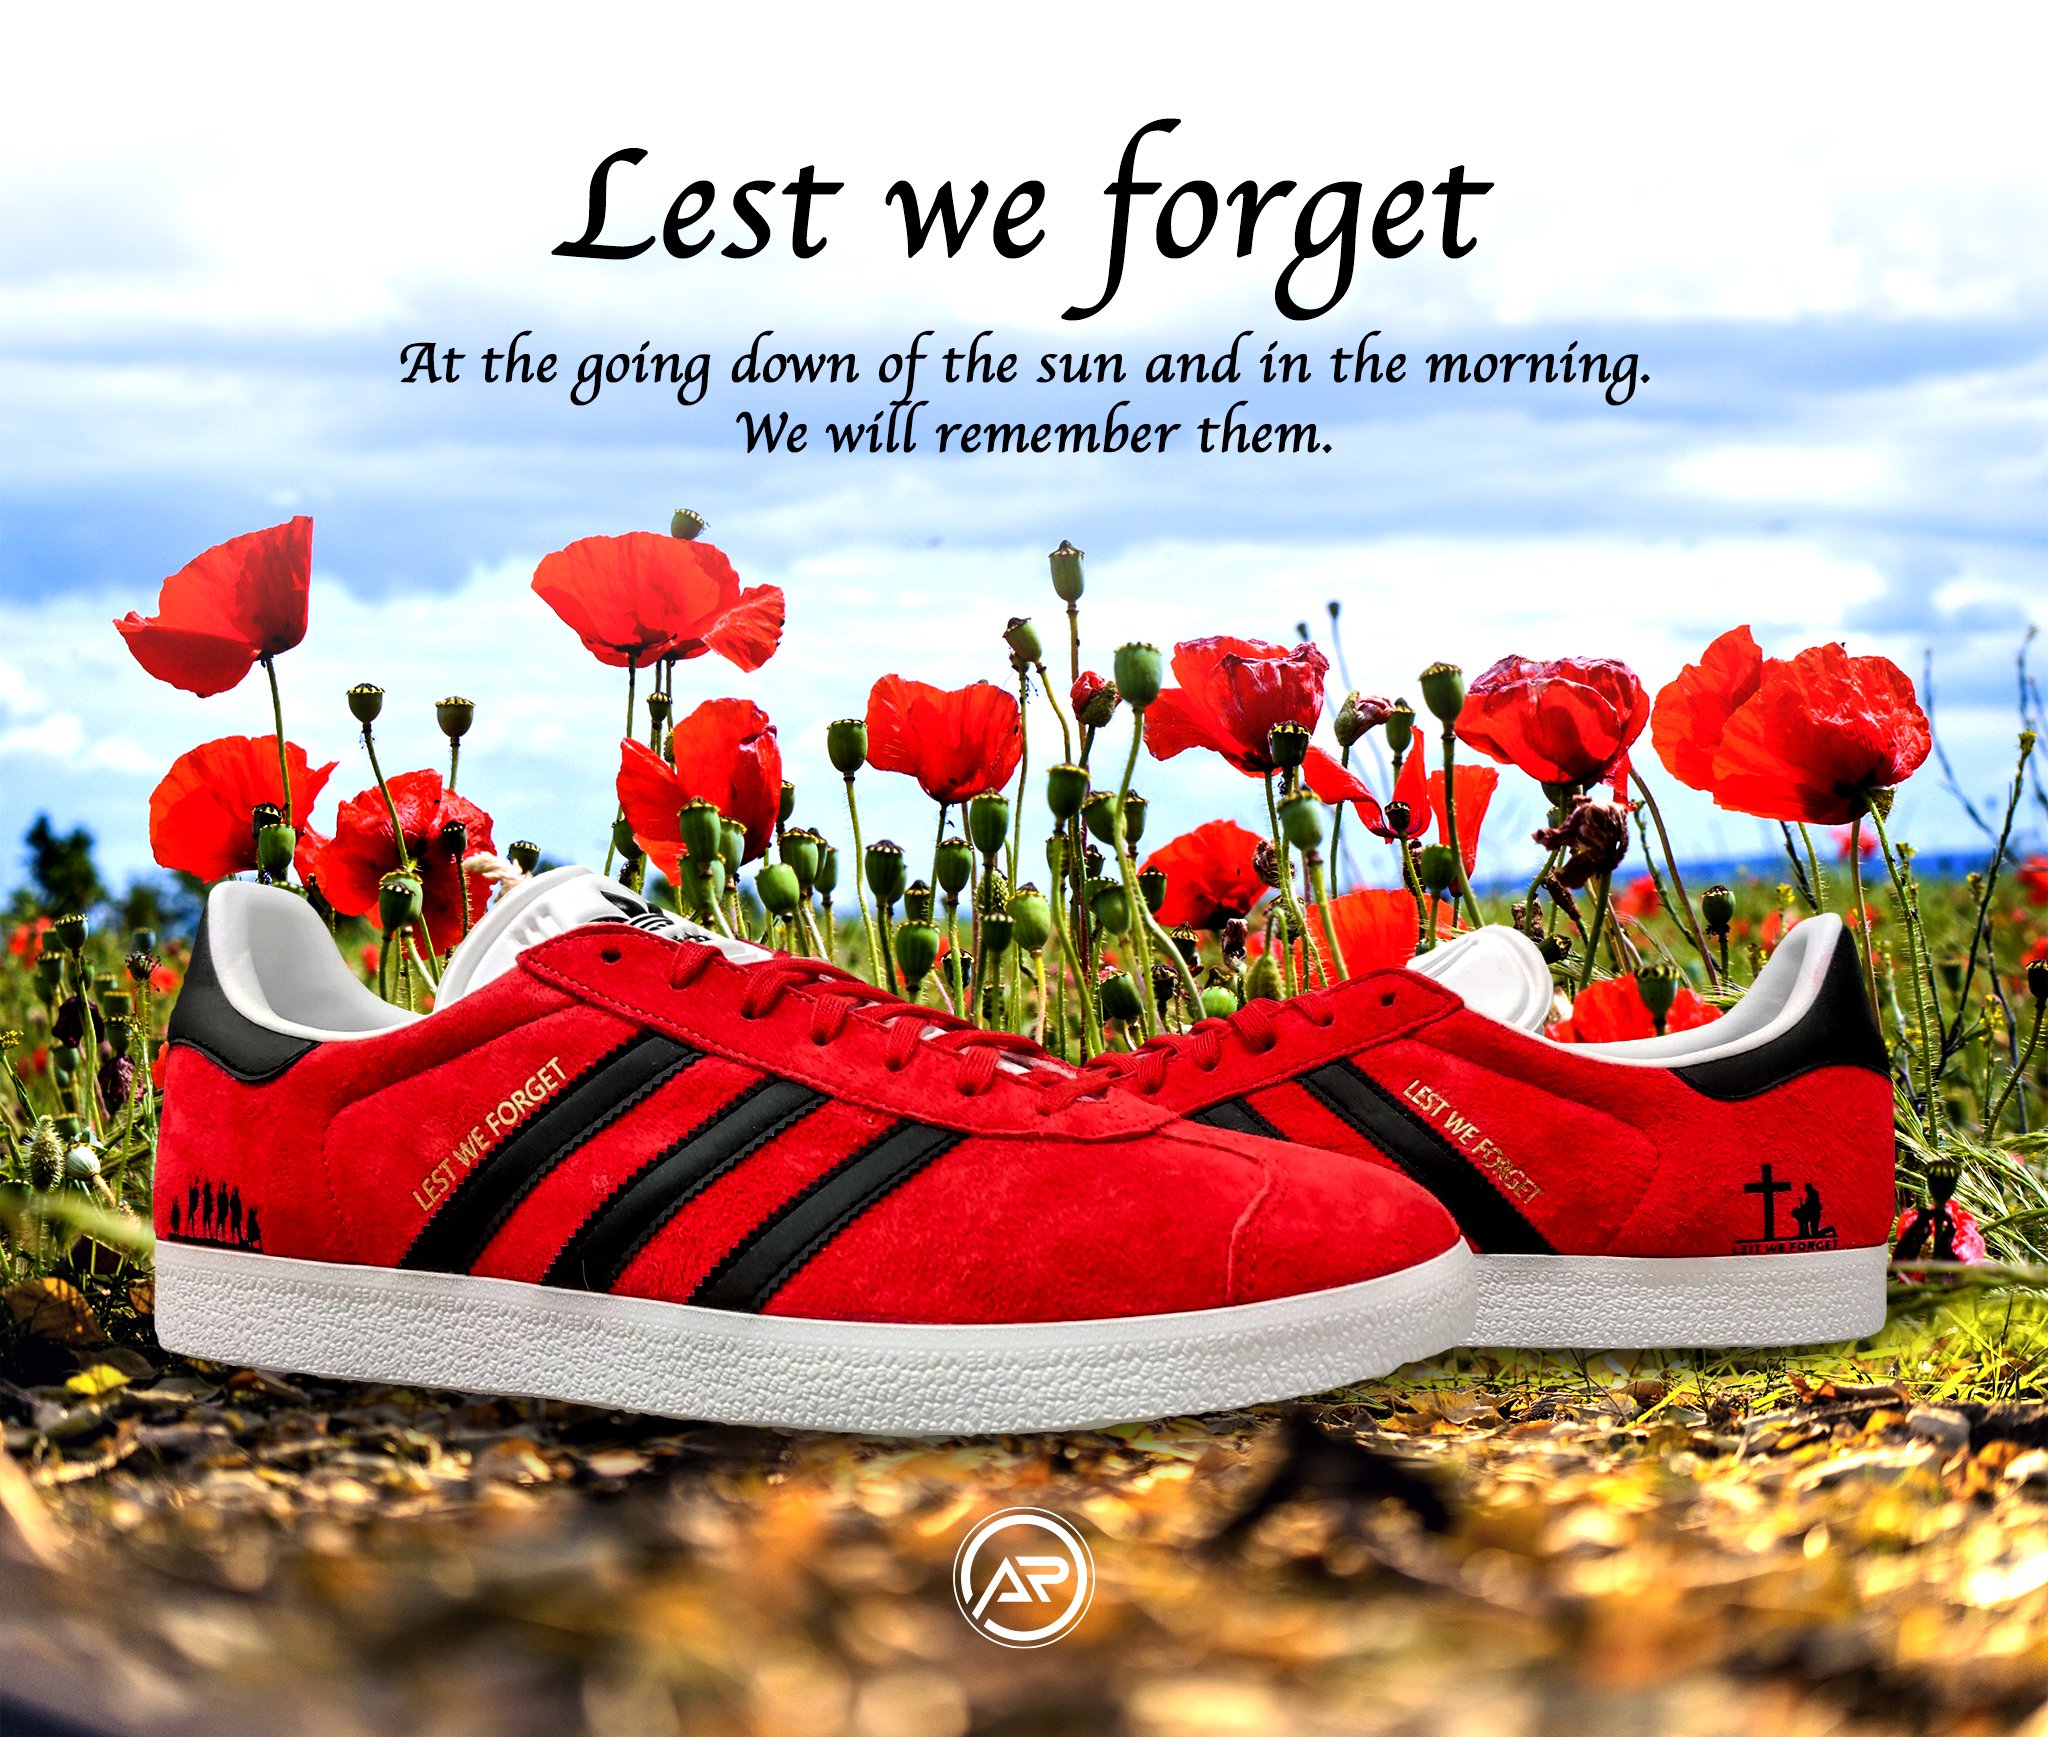 lest we forget trainers adidas